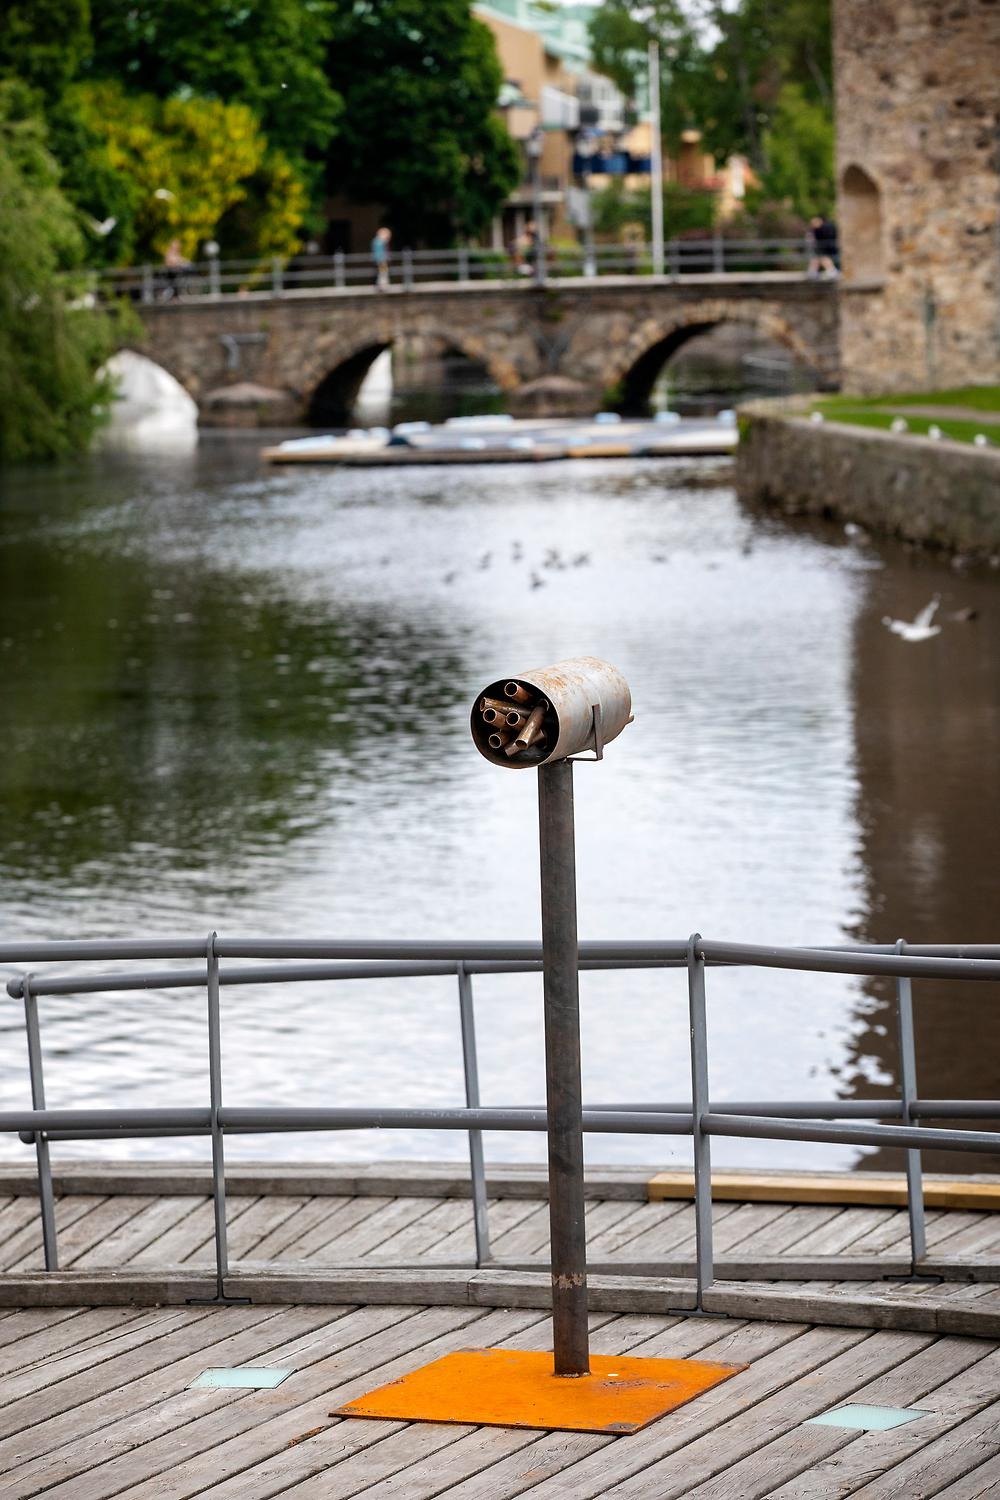 A metal sculpture is placed on the piers along Storgatan, in front of Örebro Castle. The sculpture consists of metal tubes welded together and resembles a large pair of binoculars which looks out over the water and the castle.